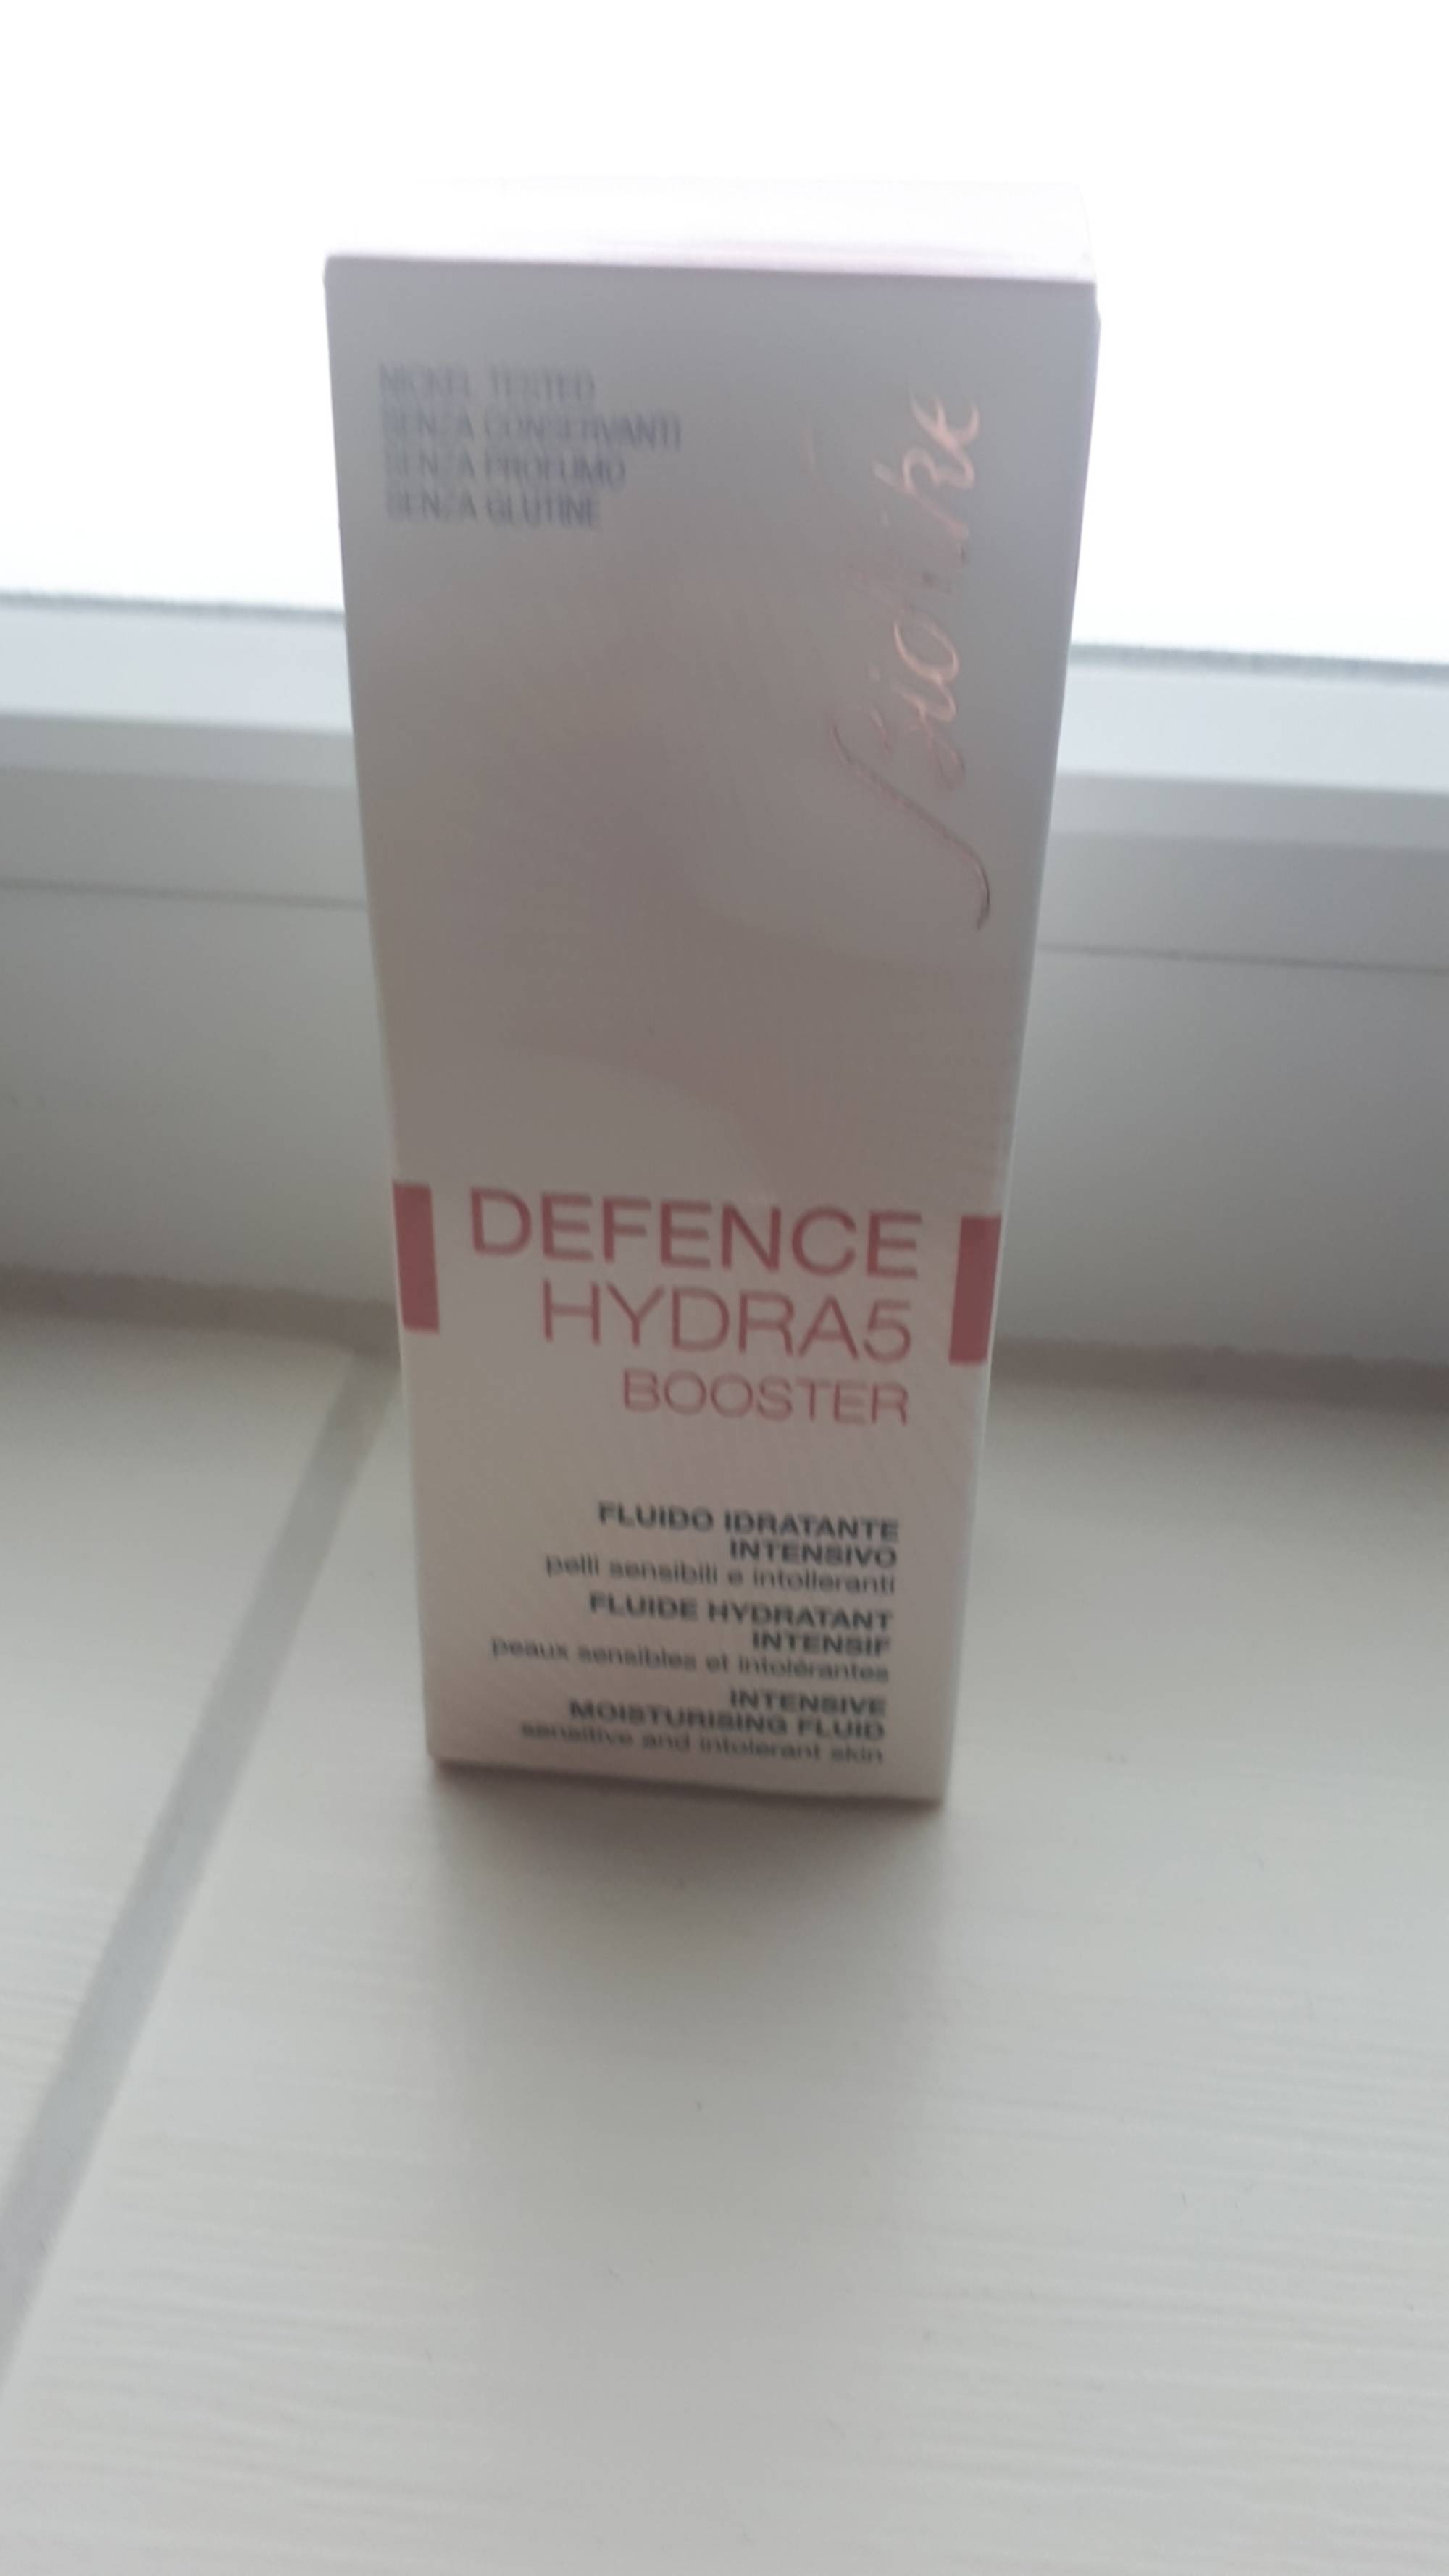 BIONIKE - Defence hydra5 booster - Fluide hydratant intensif